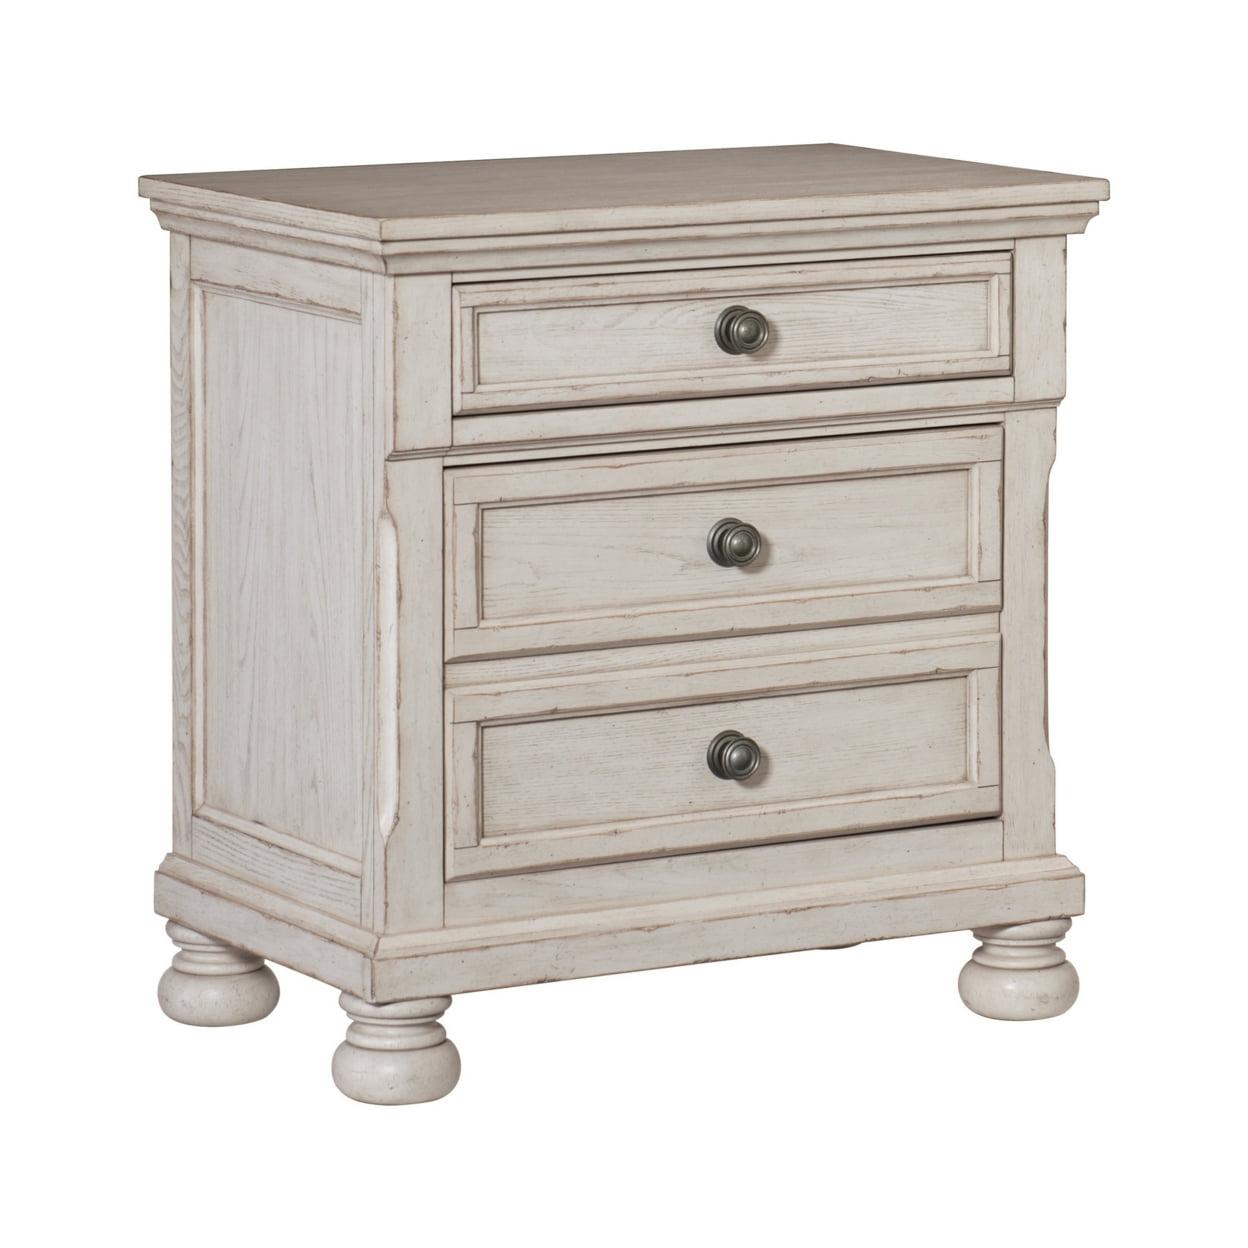 Cottage Charm Antique White 2-Drawer Nightstand with Bun Feet